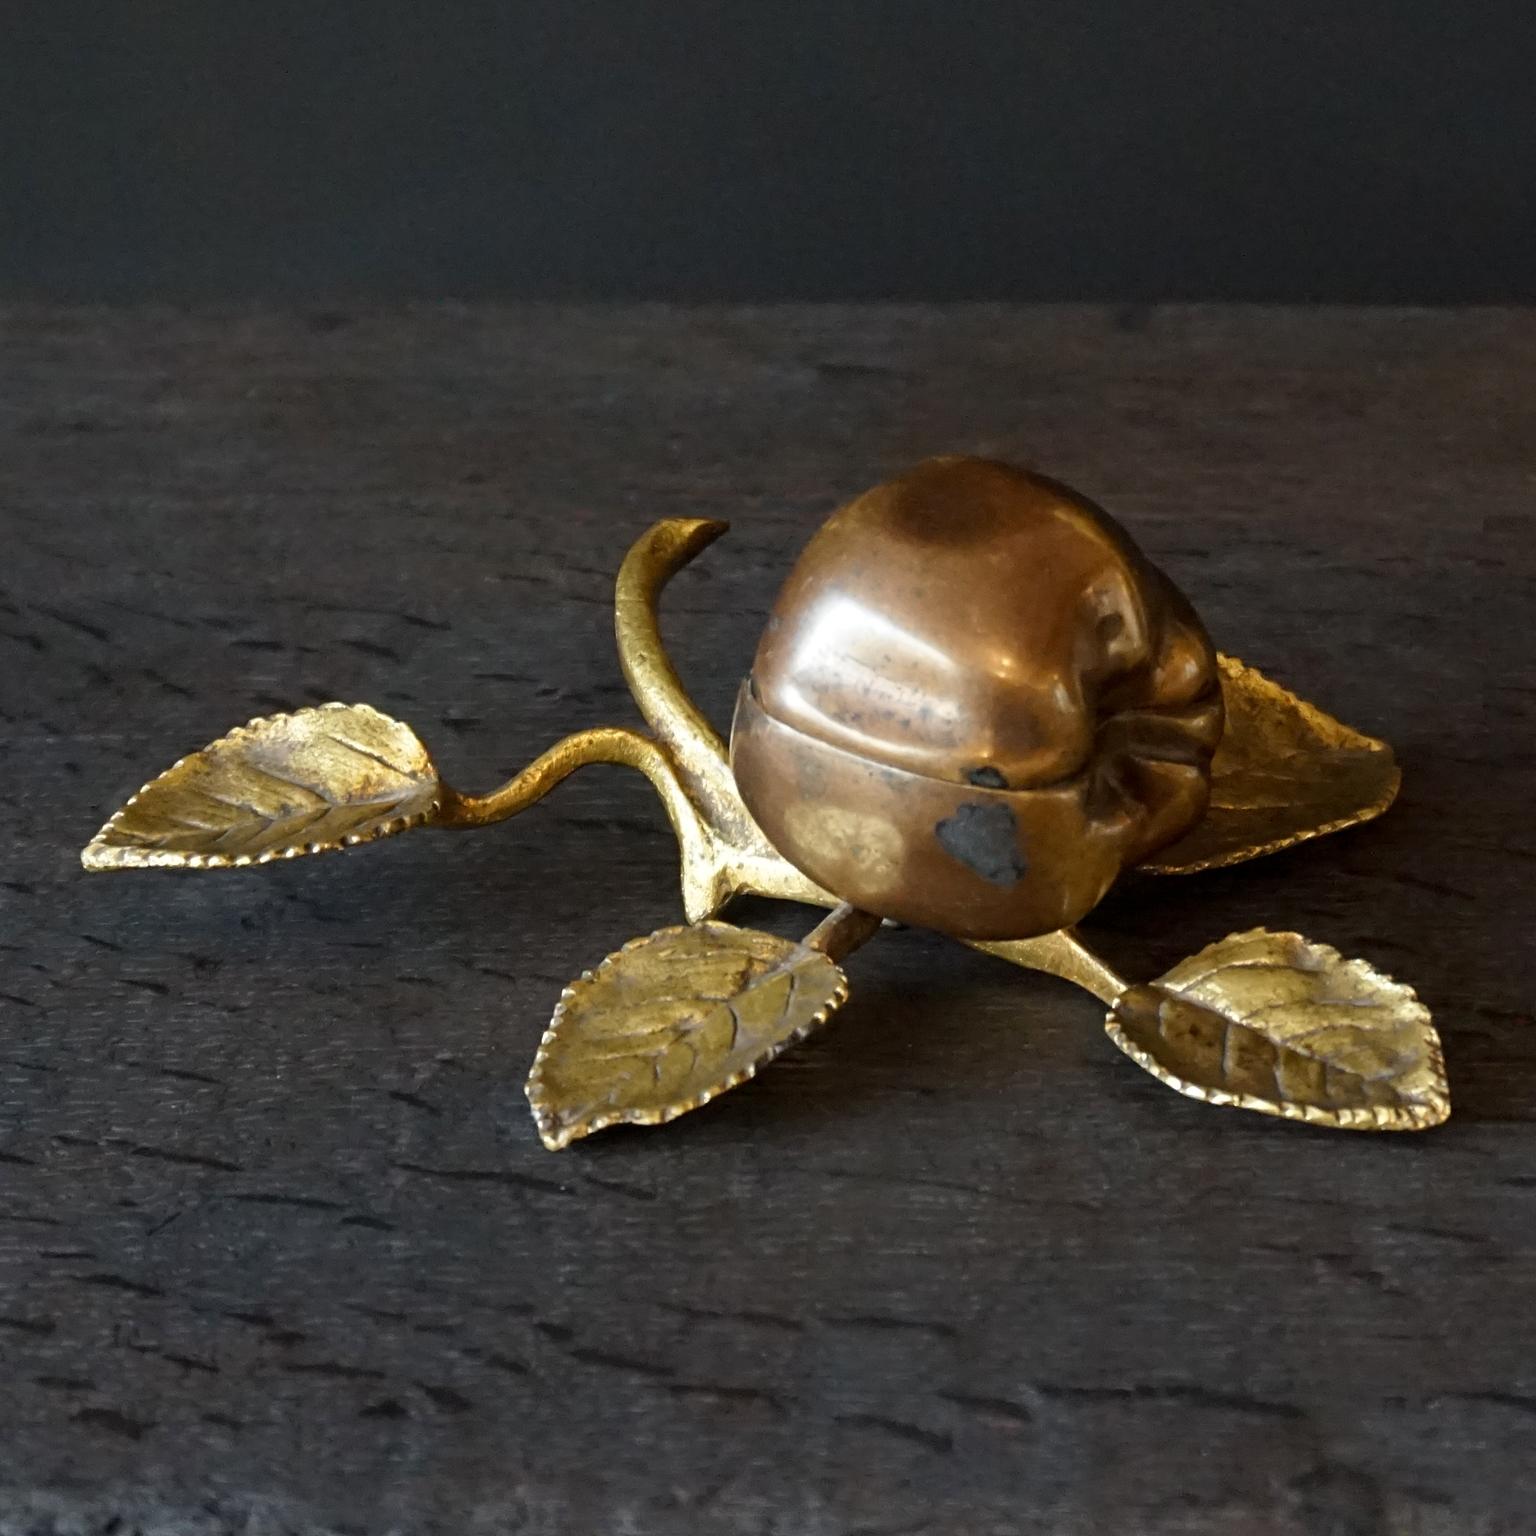 Antique hinged bronze two toned paint patinated apple on a twig with leaves, to keep or collect your little trinkets in.
This used to be called a bed-apple, for putting your jewellery in on your nightstand before going to bed. But evidently they